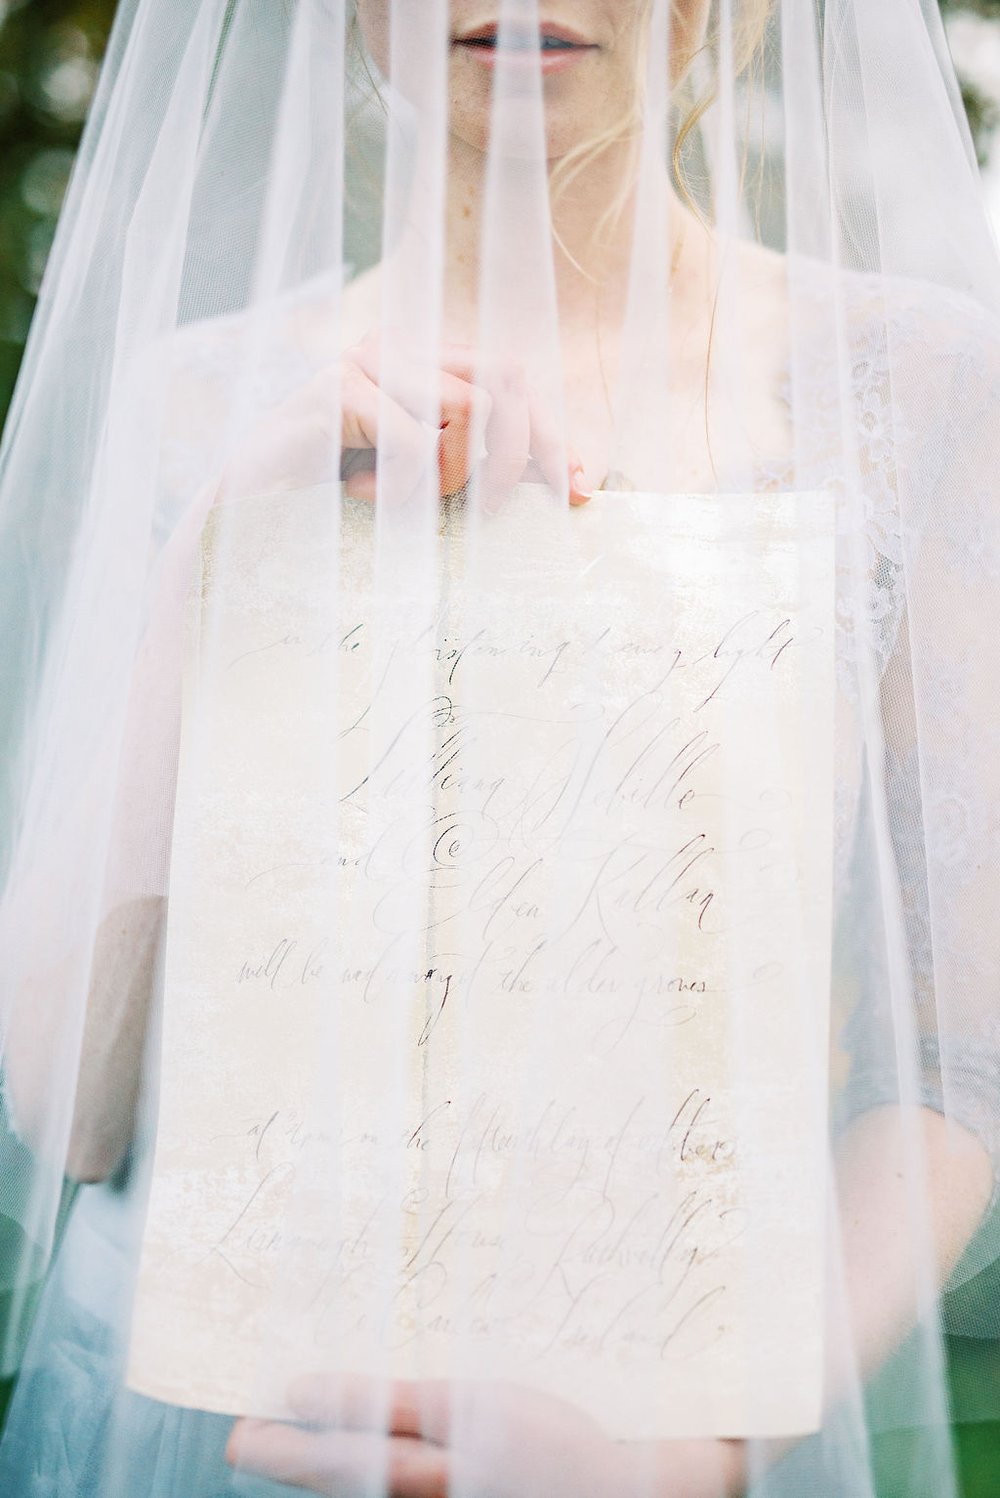 An editorial image of a bride showing a written document with big calligraphy behind her veil